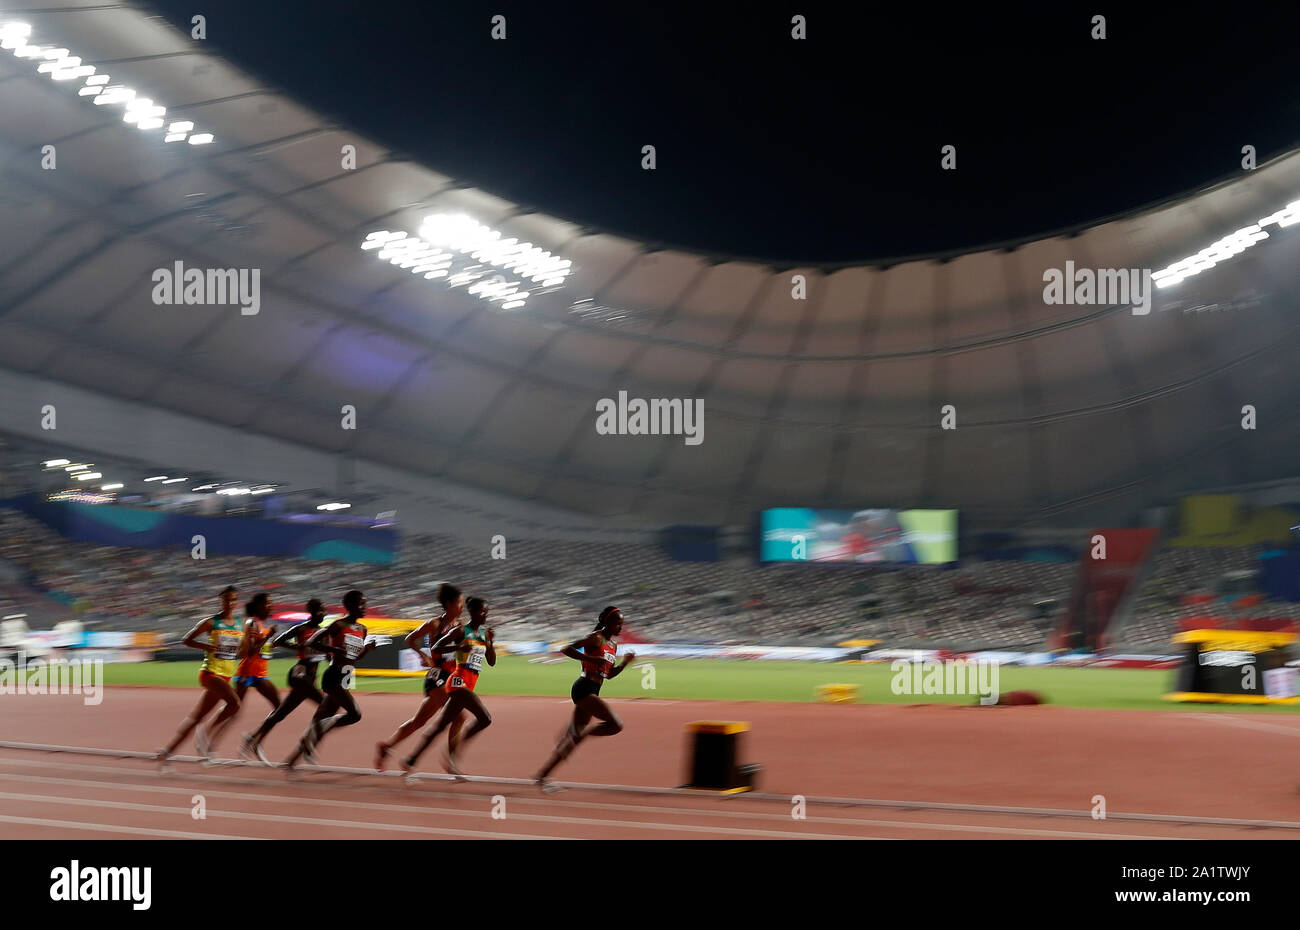 Doha, Qatar. 28th Sep, 2019. Athletes compete during the women's 10,000m final at the 2019 IAAF World Championships in Doha, Qatar, Sept. 28, 2019. Credit: Wang Lili/Xinhua/Alamy Live News Stock Photo